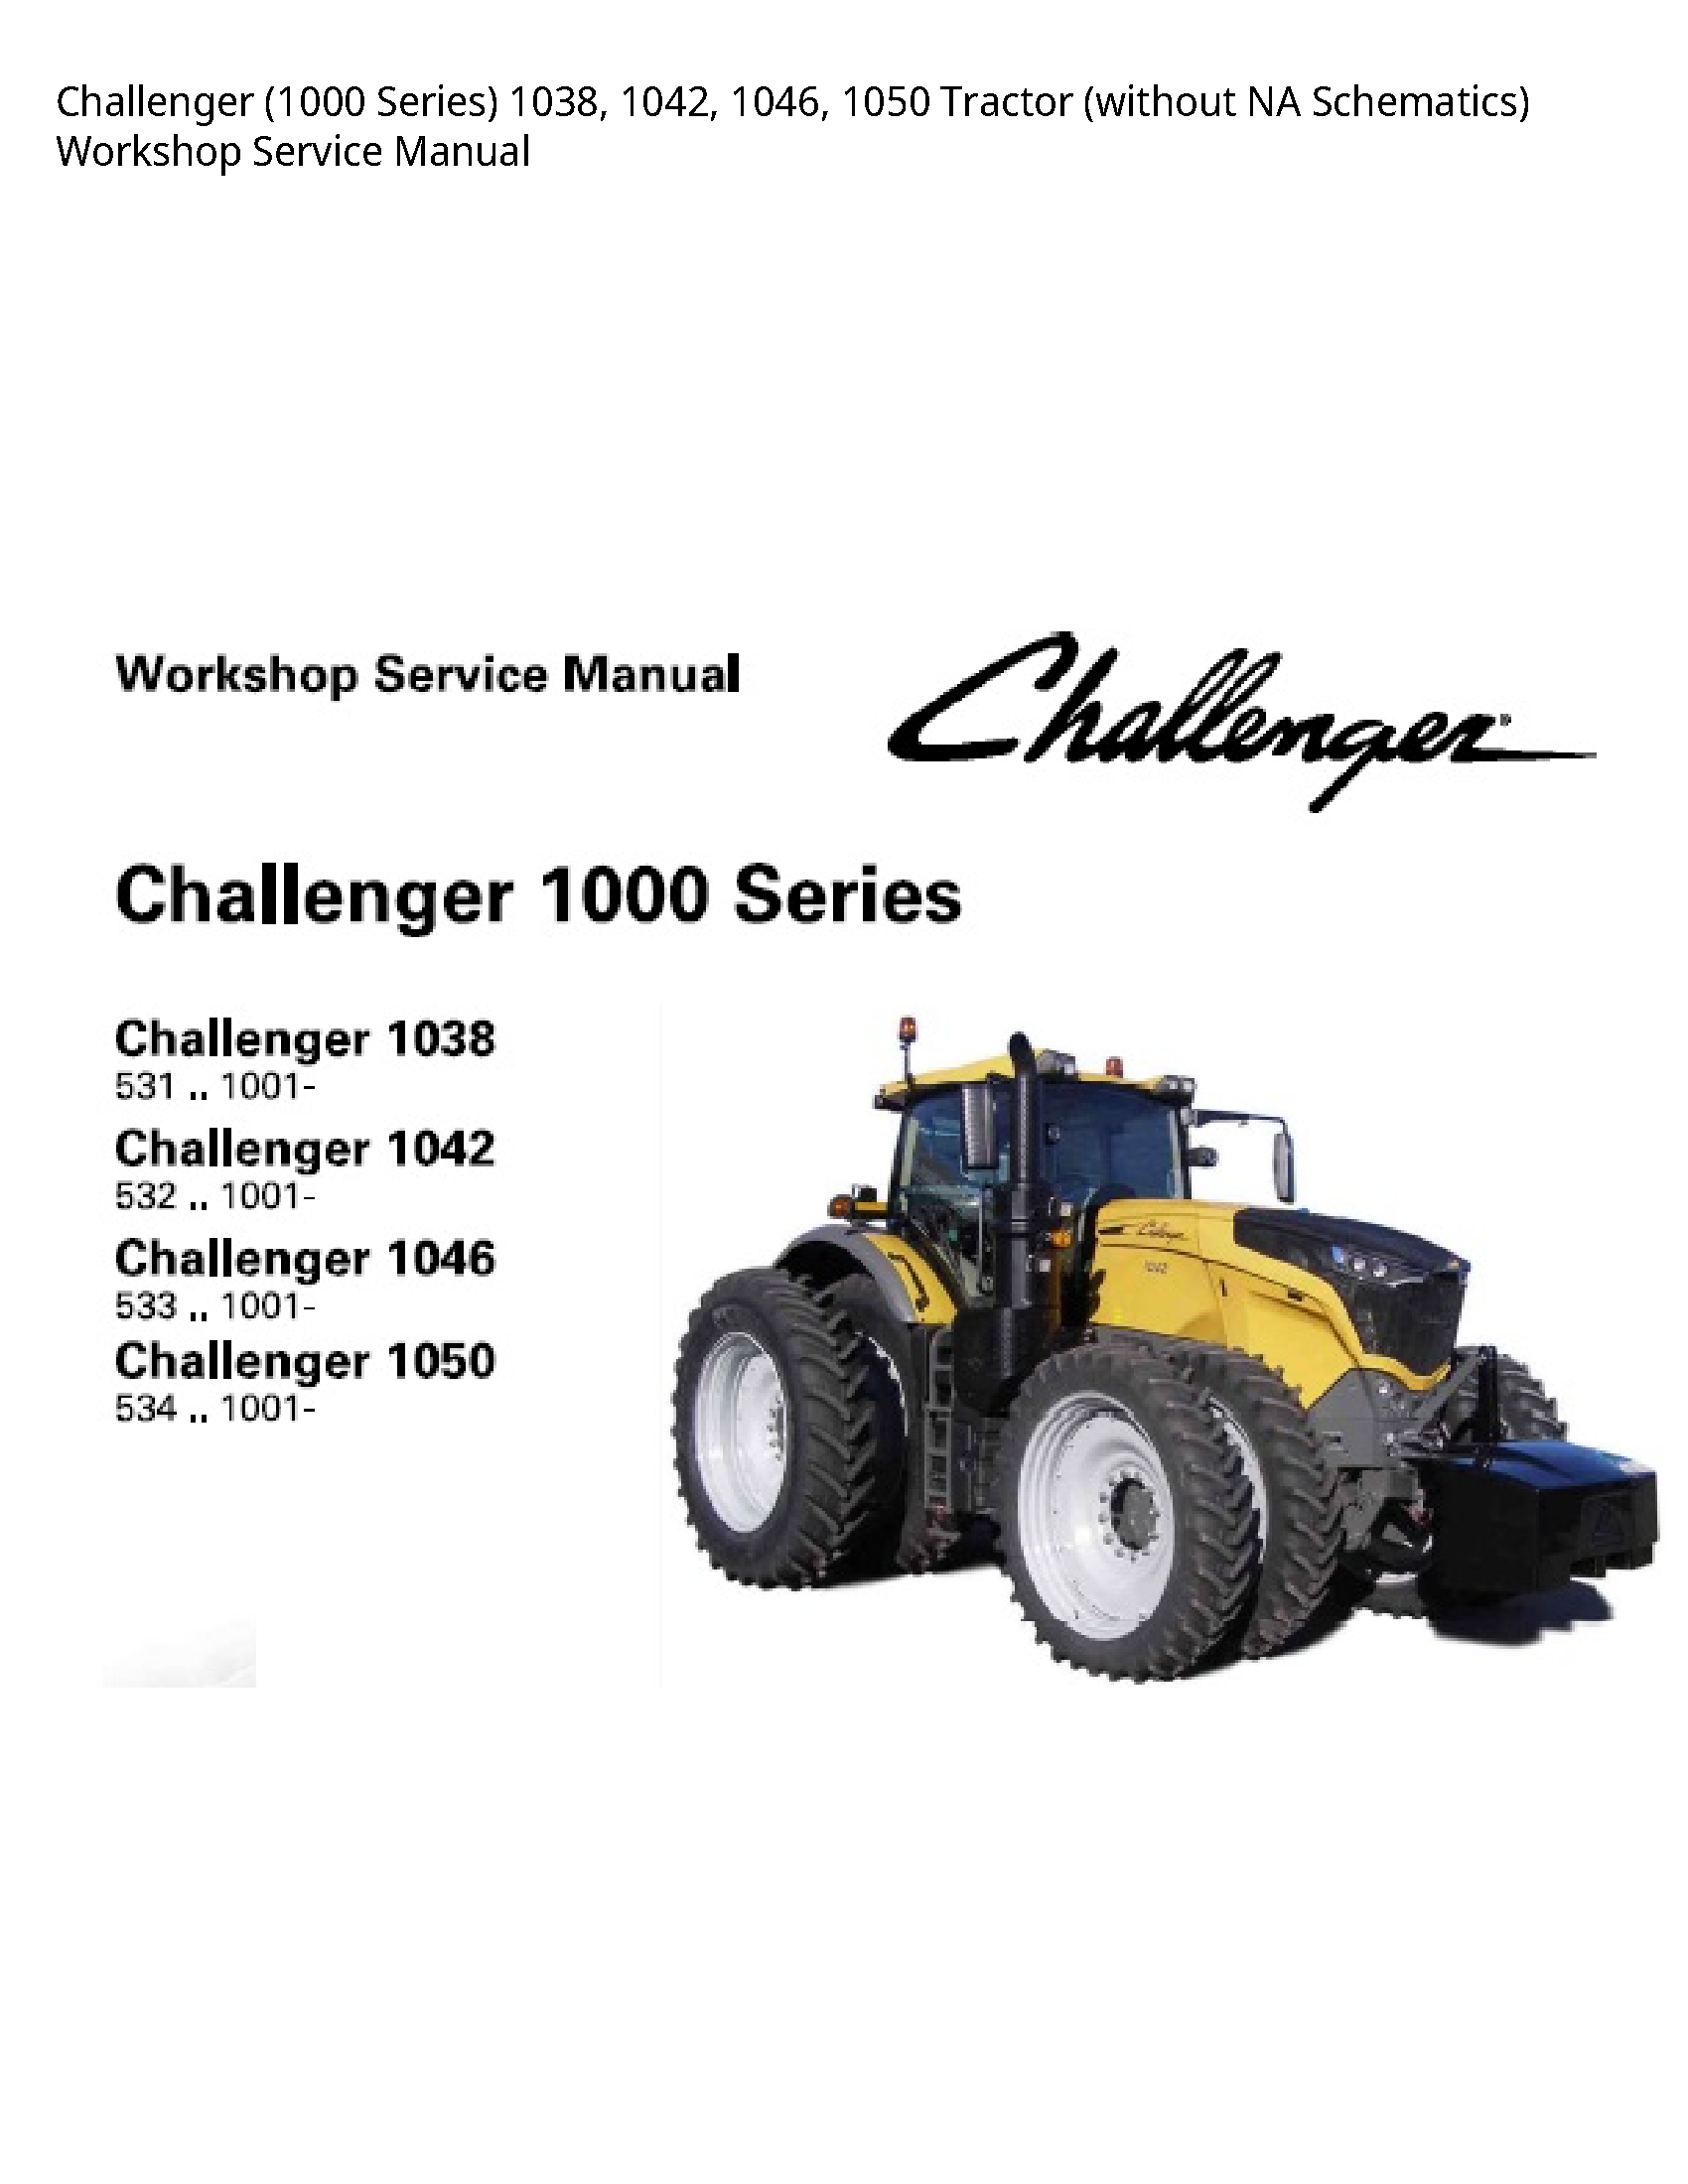 Challenger (1000 Series) Tractor (without NA Schematics) Service manual